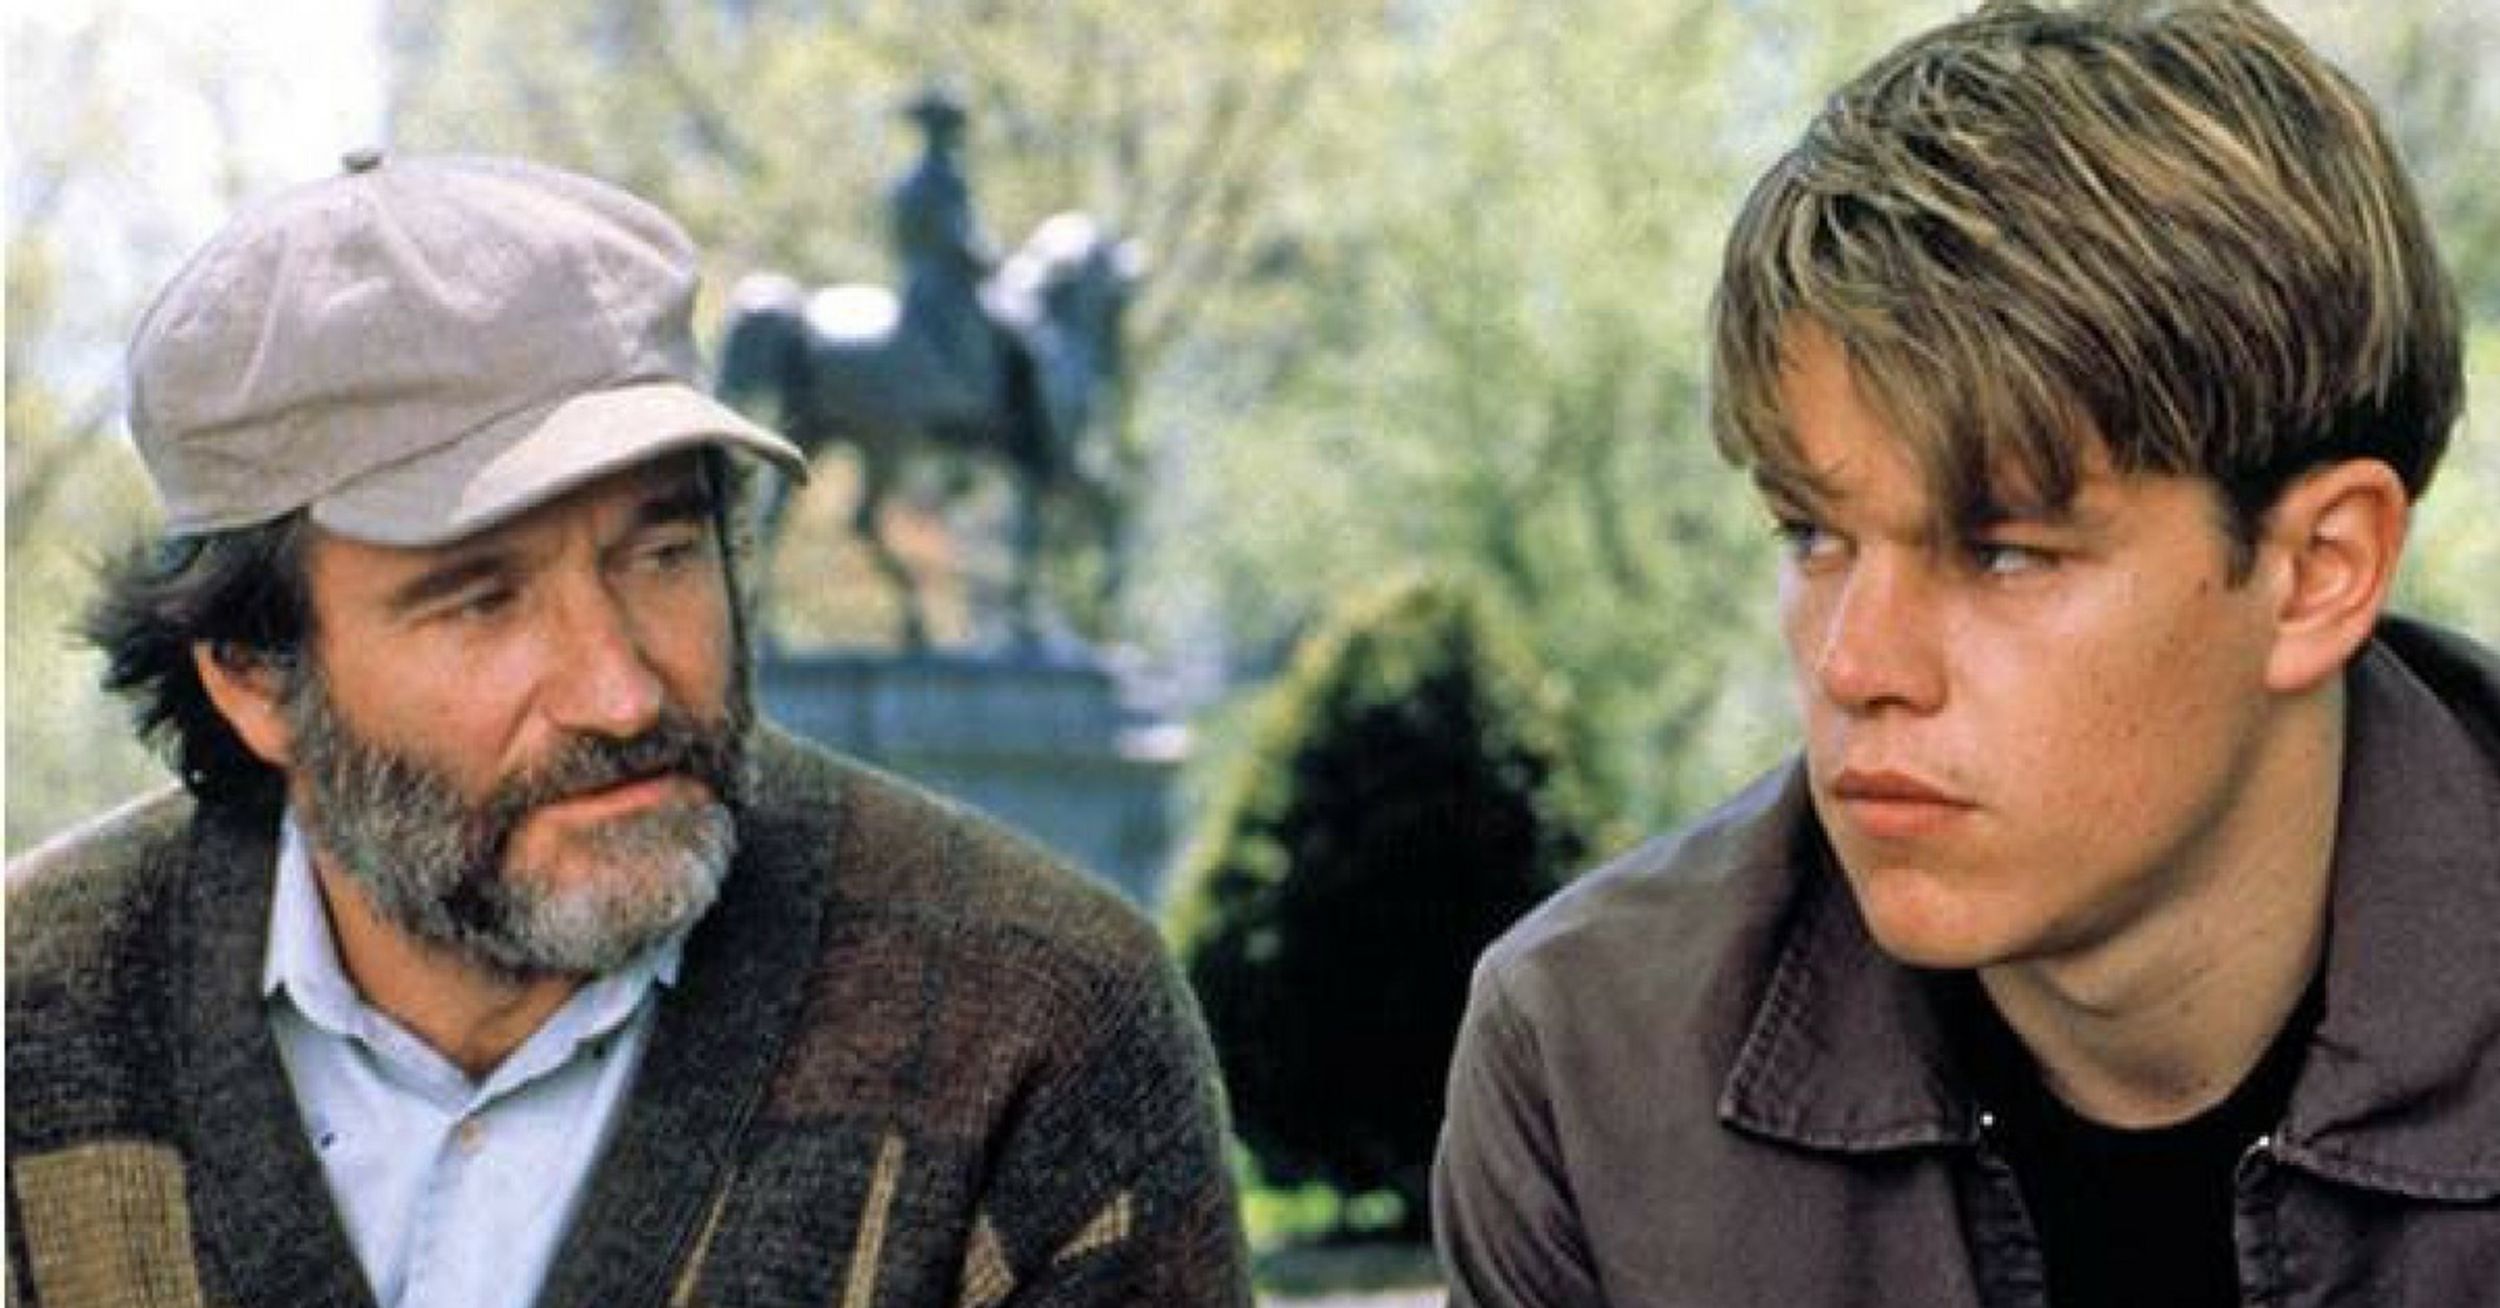 Interview About Robin Williams Trying To Make Matt Damon Laugh On The Set Of 'Good Will Hunting' Makes Us Miss Him Even More